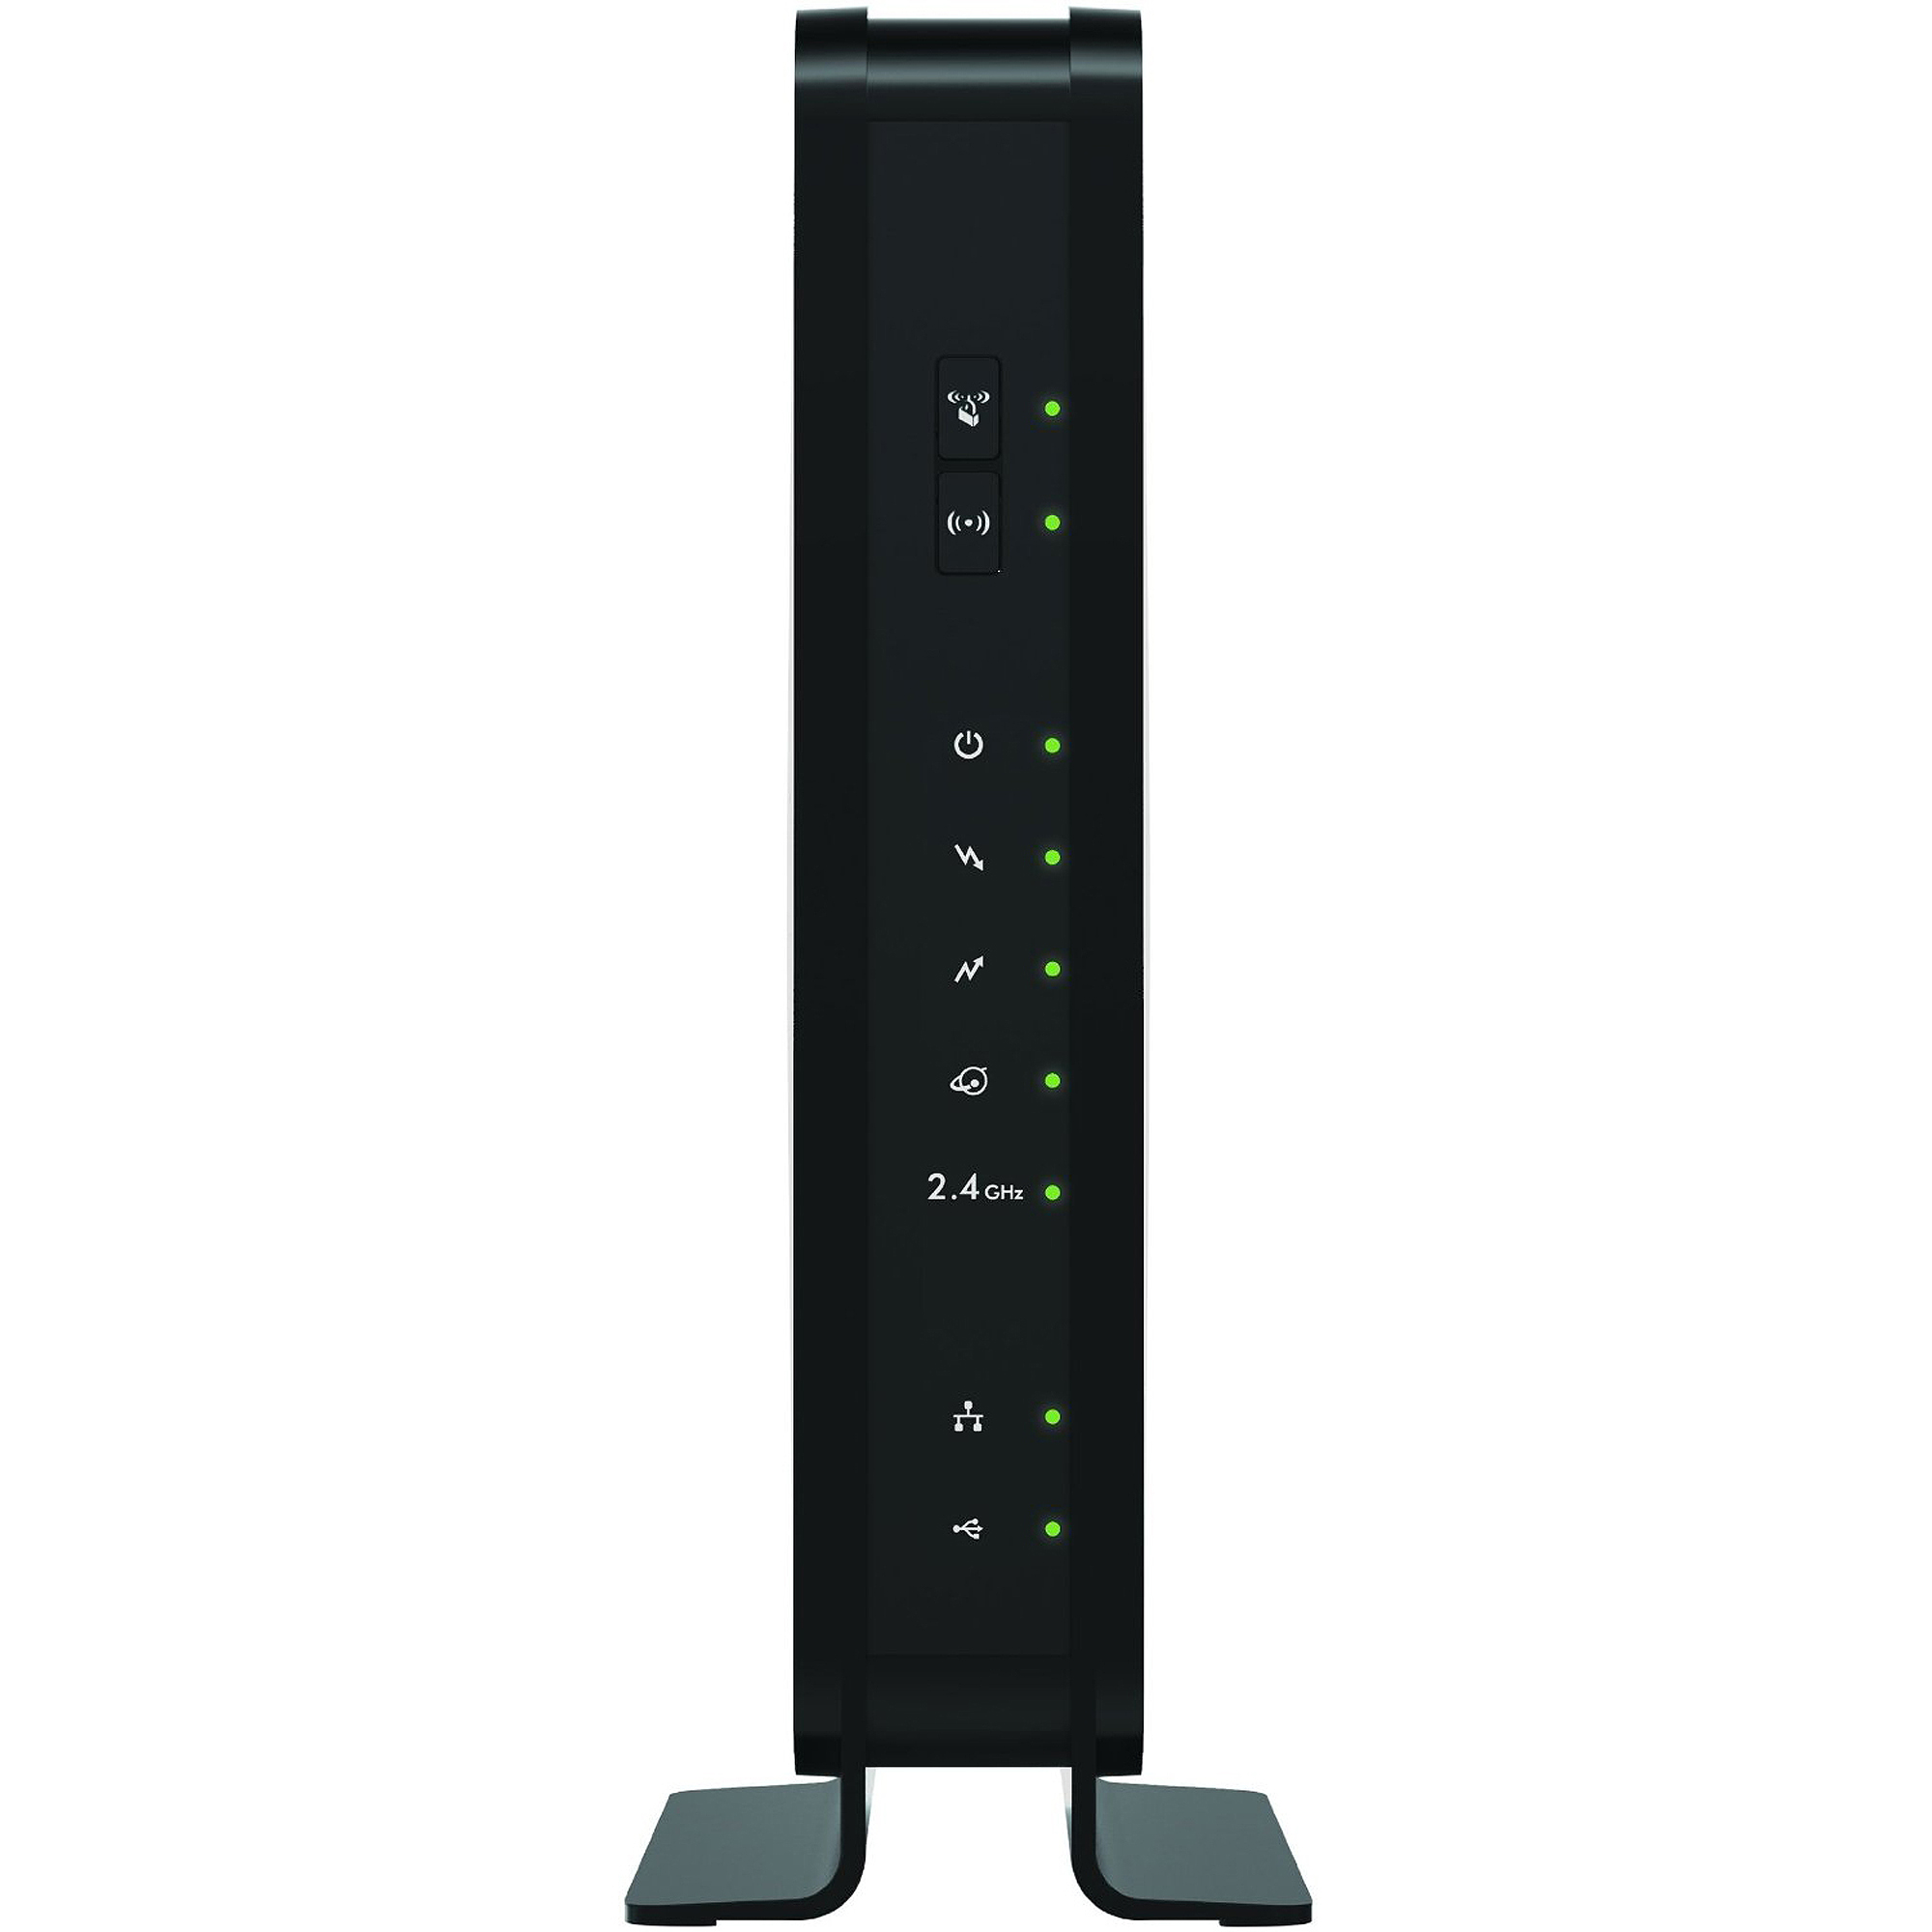 NETGEAR N300 (8x4) WiFi Cable Modem Router Combo C3000, DOCSIS 3.0 | Certified for Xfinity by Comcast, Spectrum, COX & more (C3000) - image 4 of 4